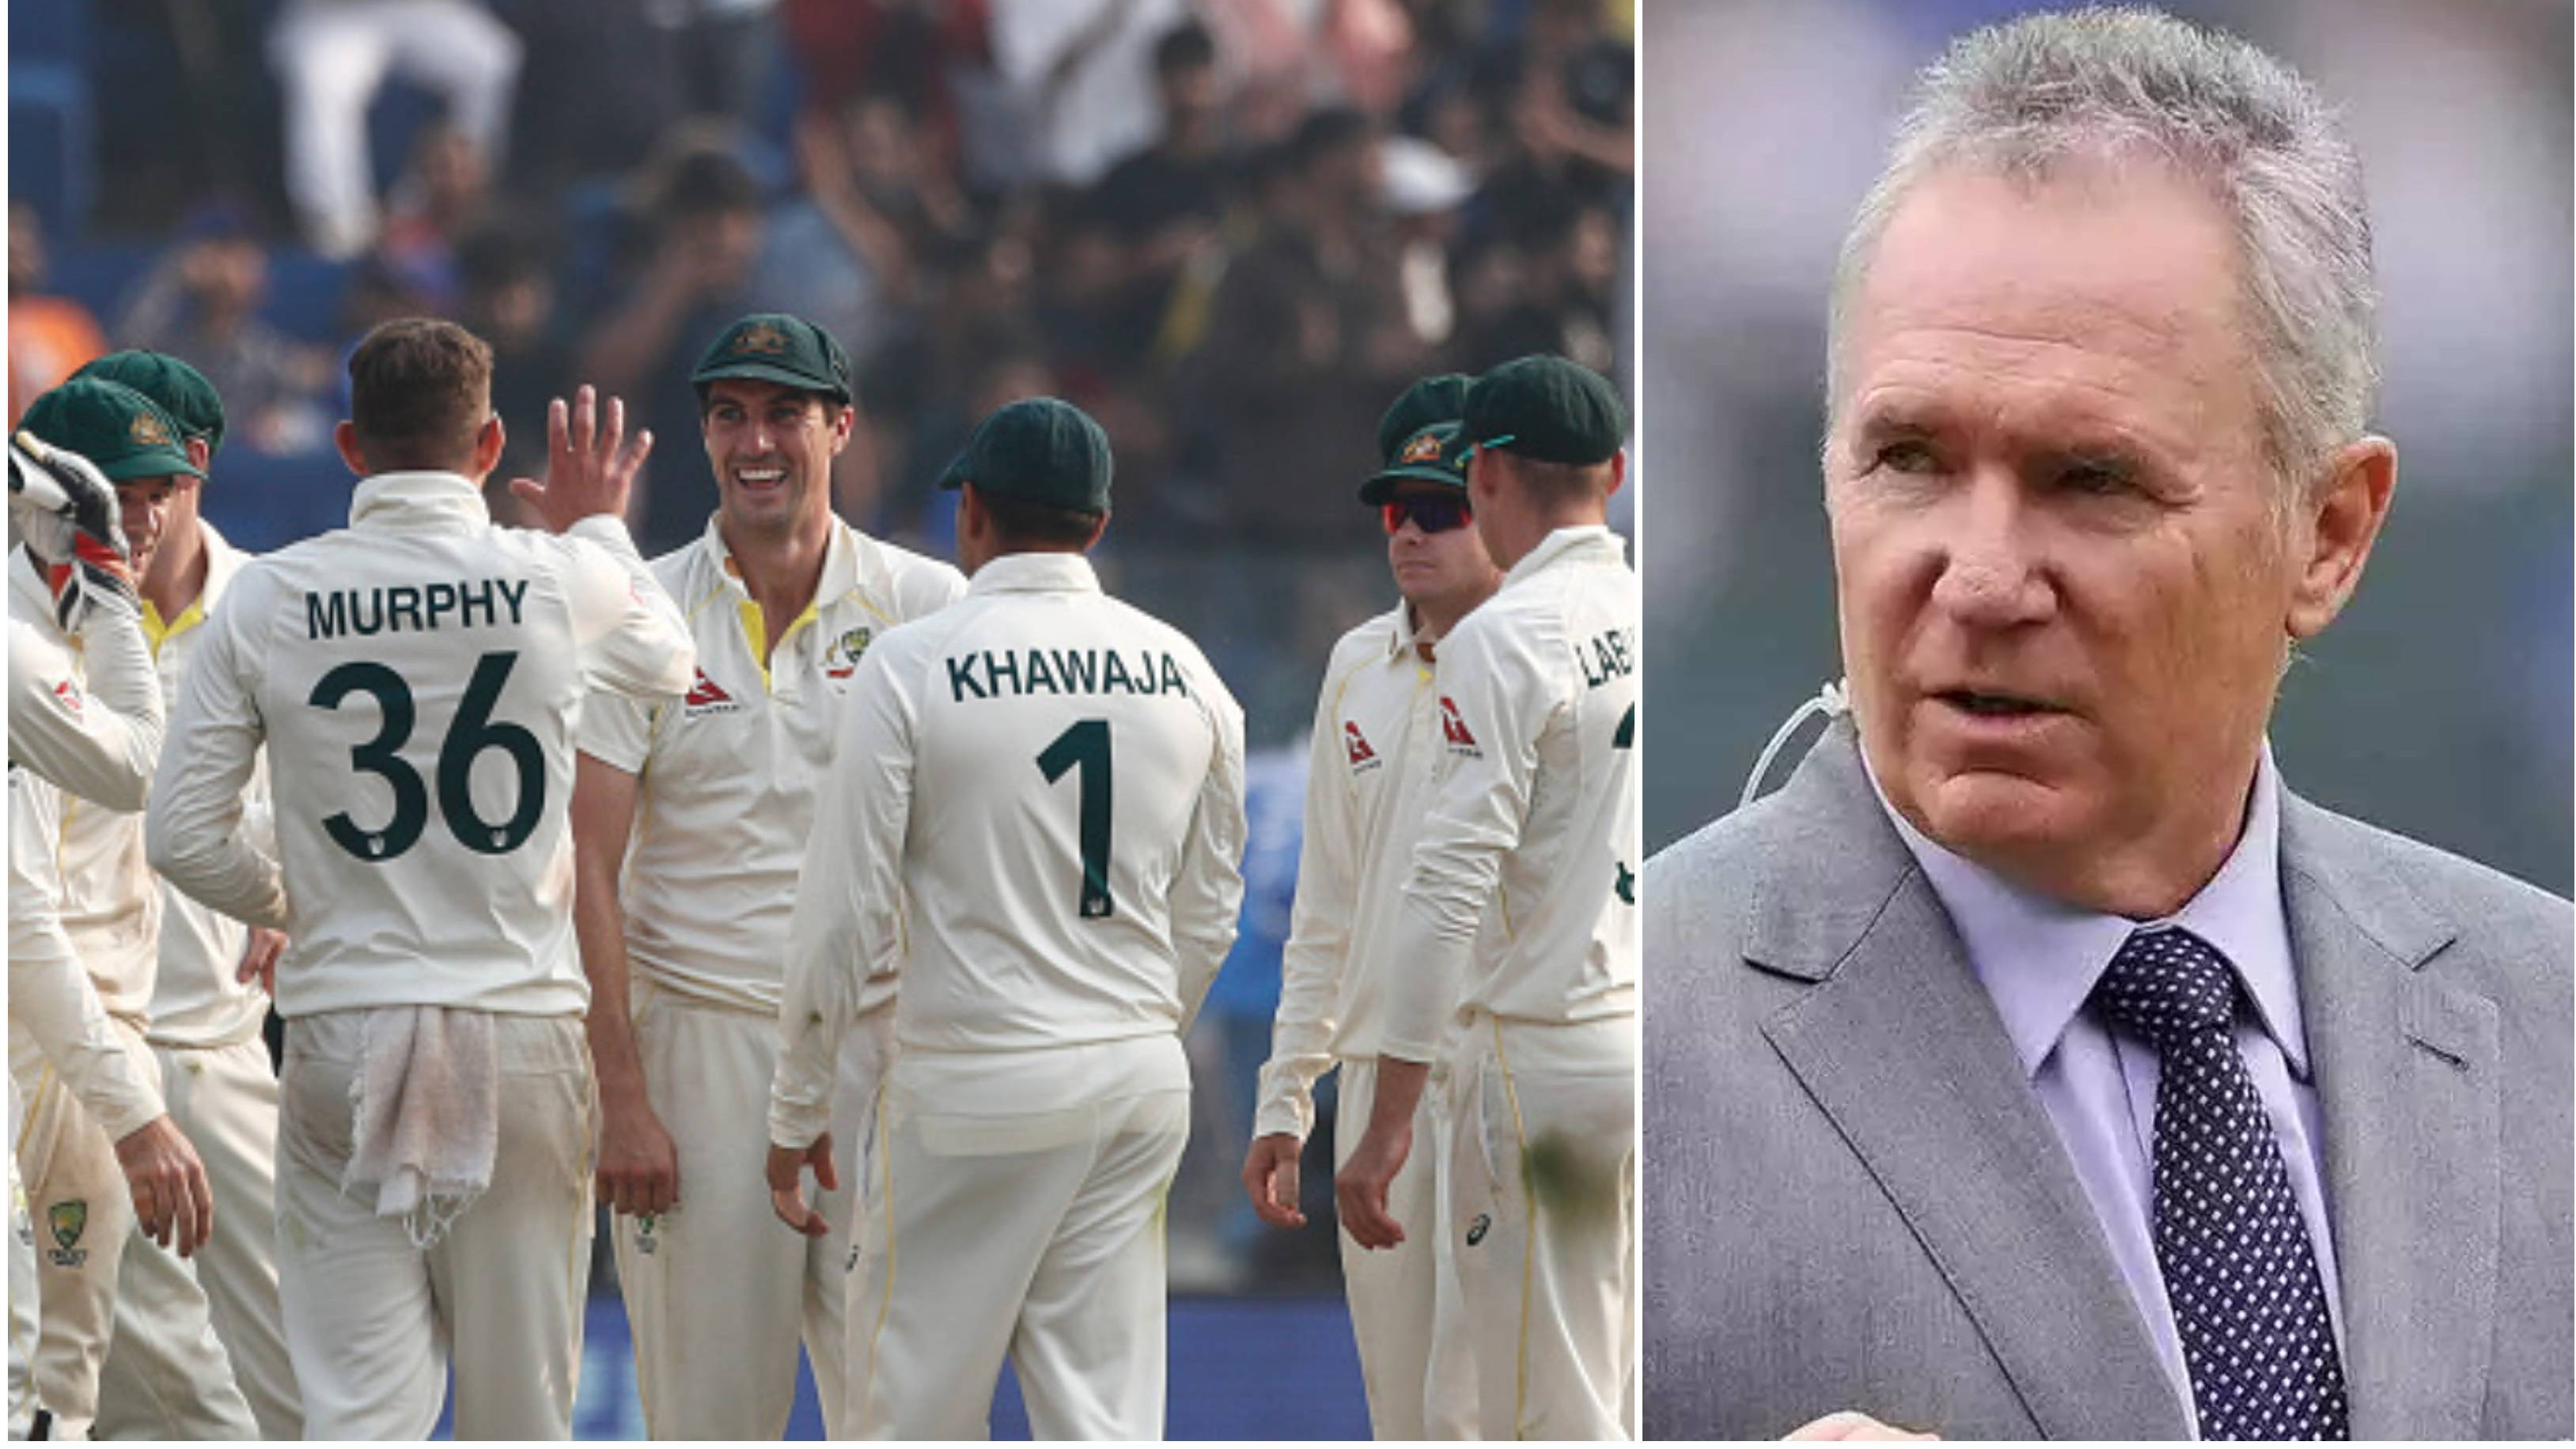 “That's fraught with danger,” Allan Border on Australia’s decision to not play warm-up games ahead of WTC final